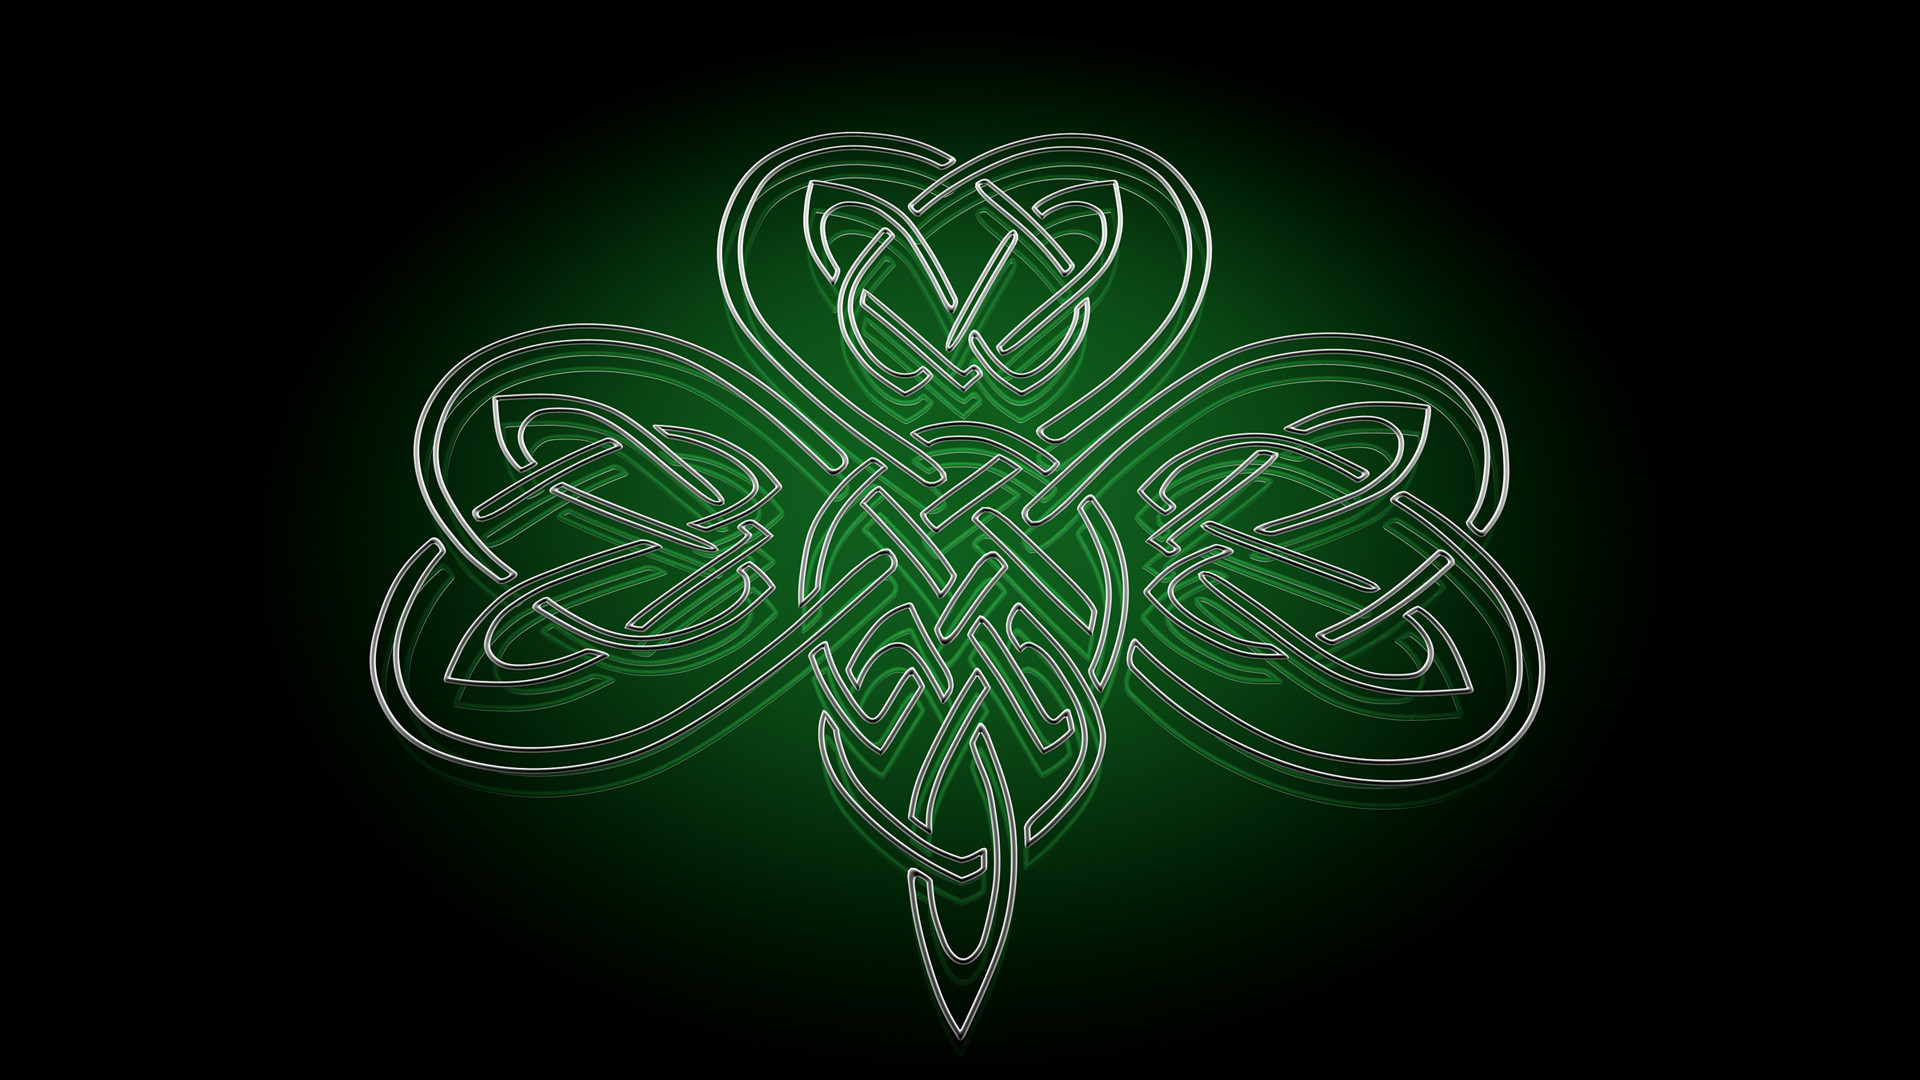 1920x1080 Displaying 18 Images For Celtic Symbol Wallpaper | Coloring Pages